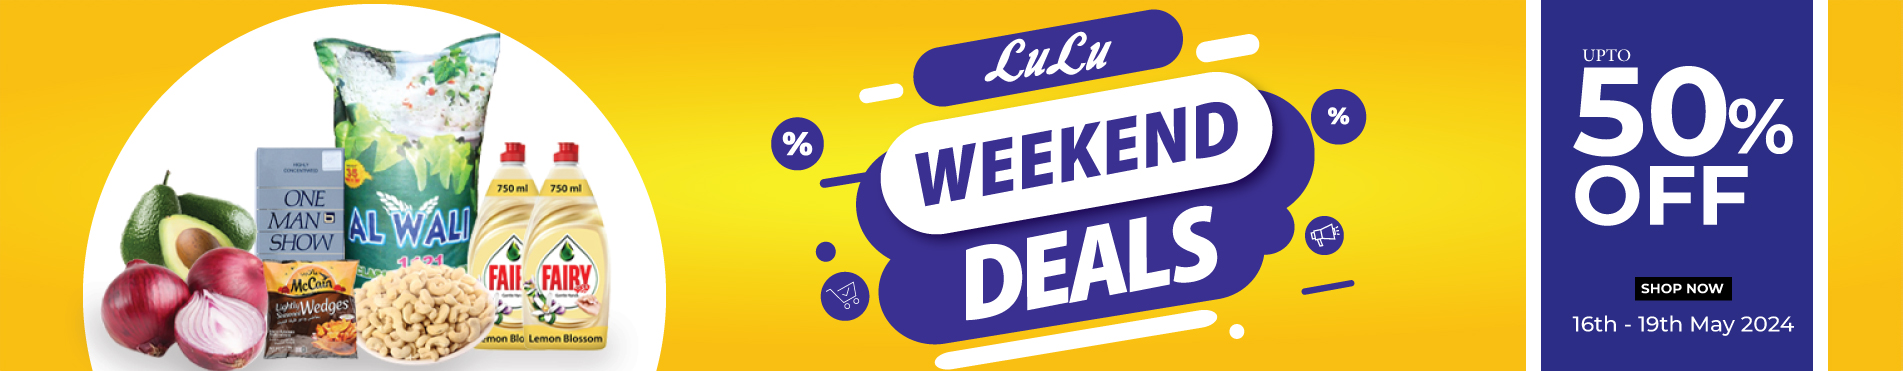 weekend deals 19th may